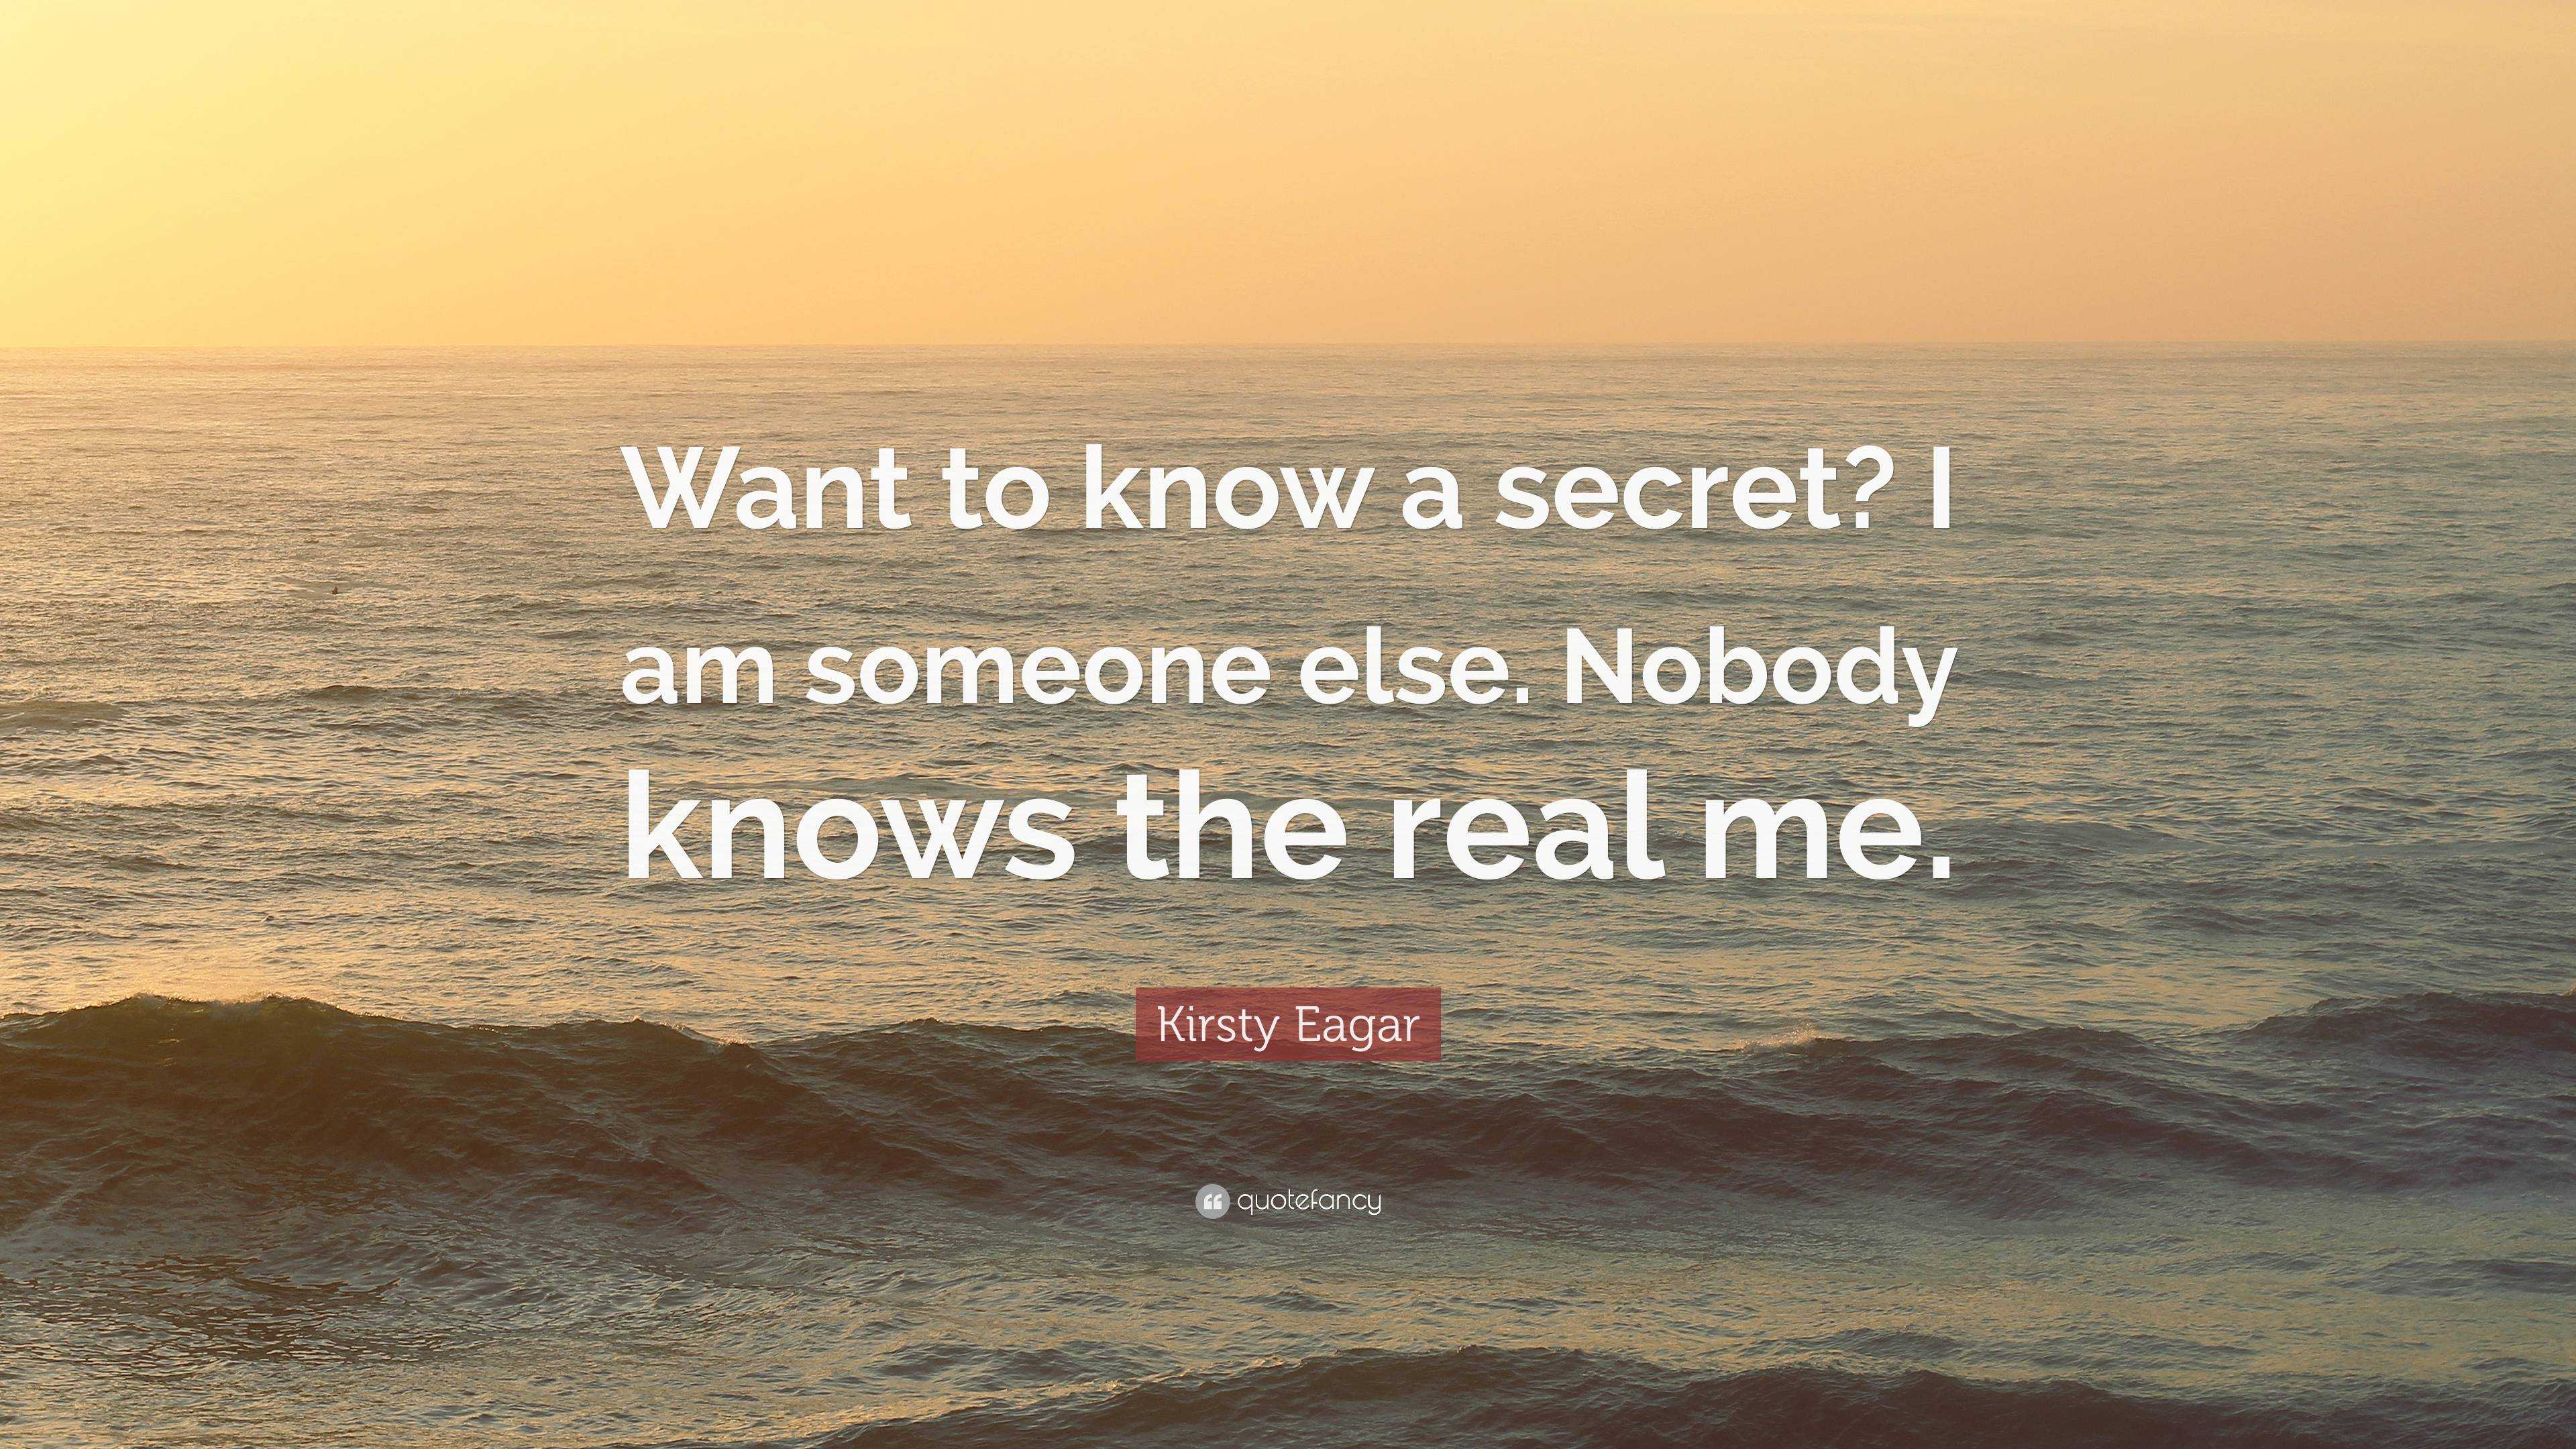 https://quotefancy.com/media/wallpaper/3840x2160/6435351-Kirsty-Eagar-Quote-Want-to-know-a-secret-I-am-someone-else-Nobody.jpg